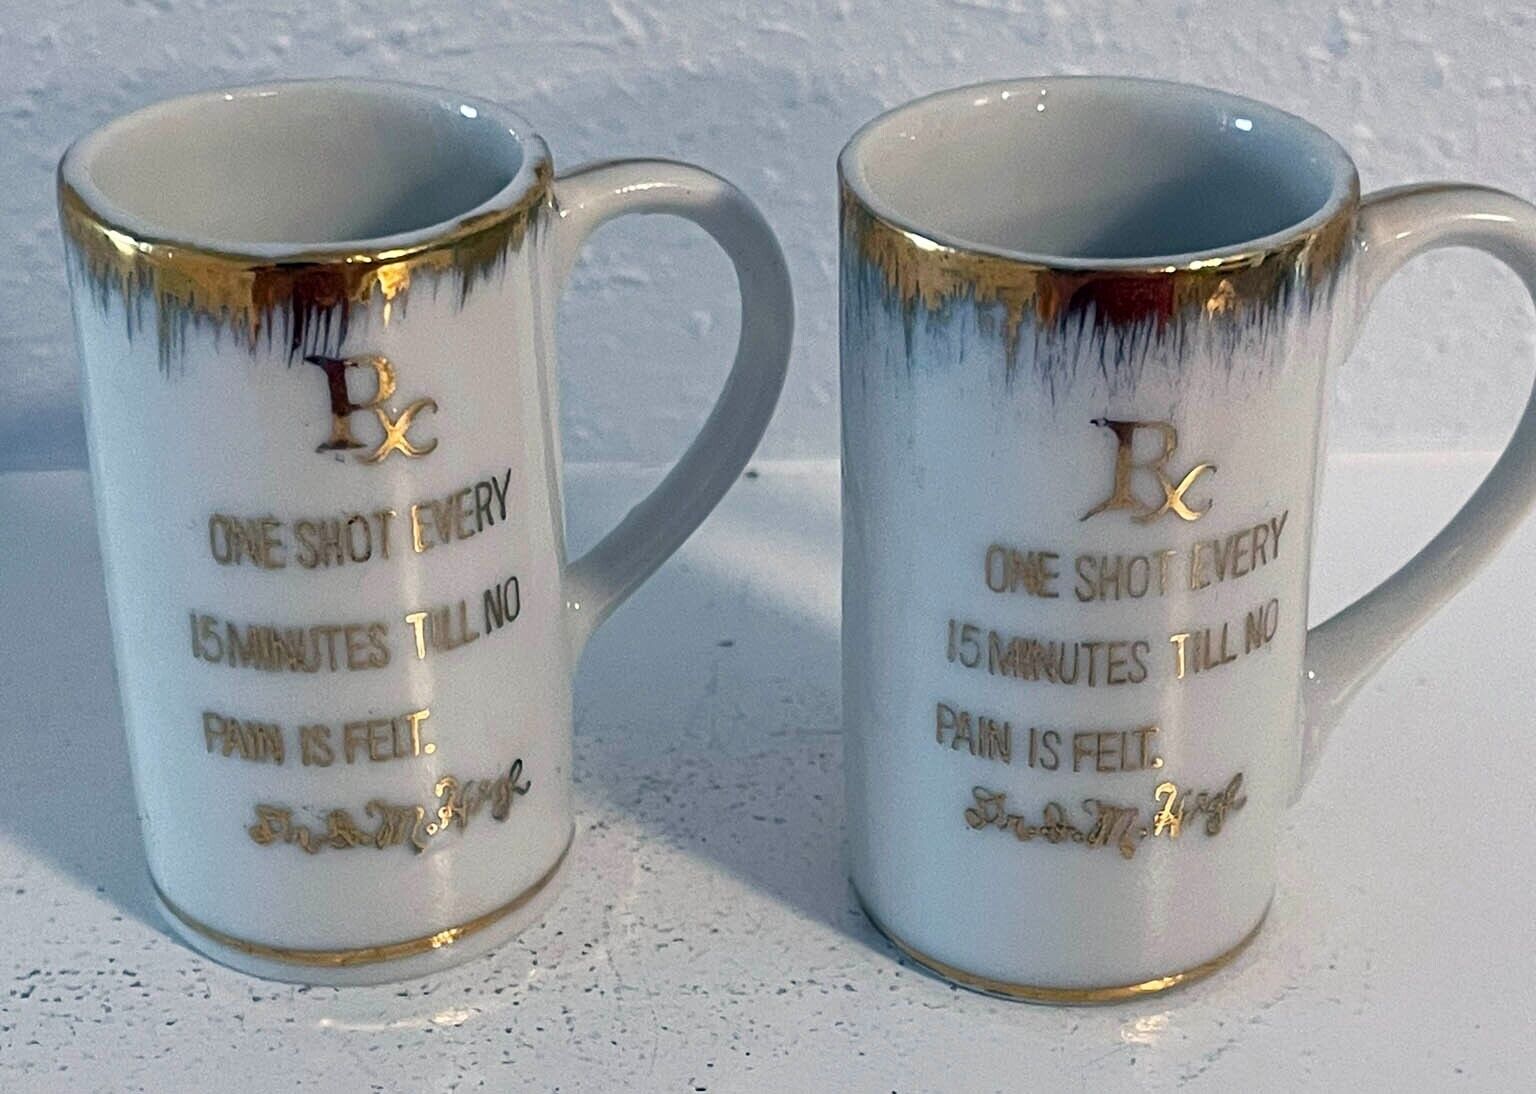 Two Vintage Shot Glasses RX one shot/every 15 minutes Dr. I. M. High 1960s